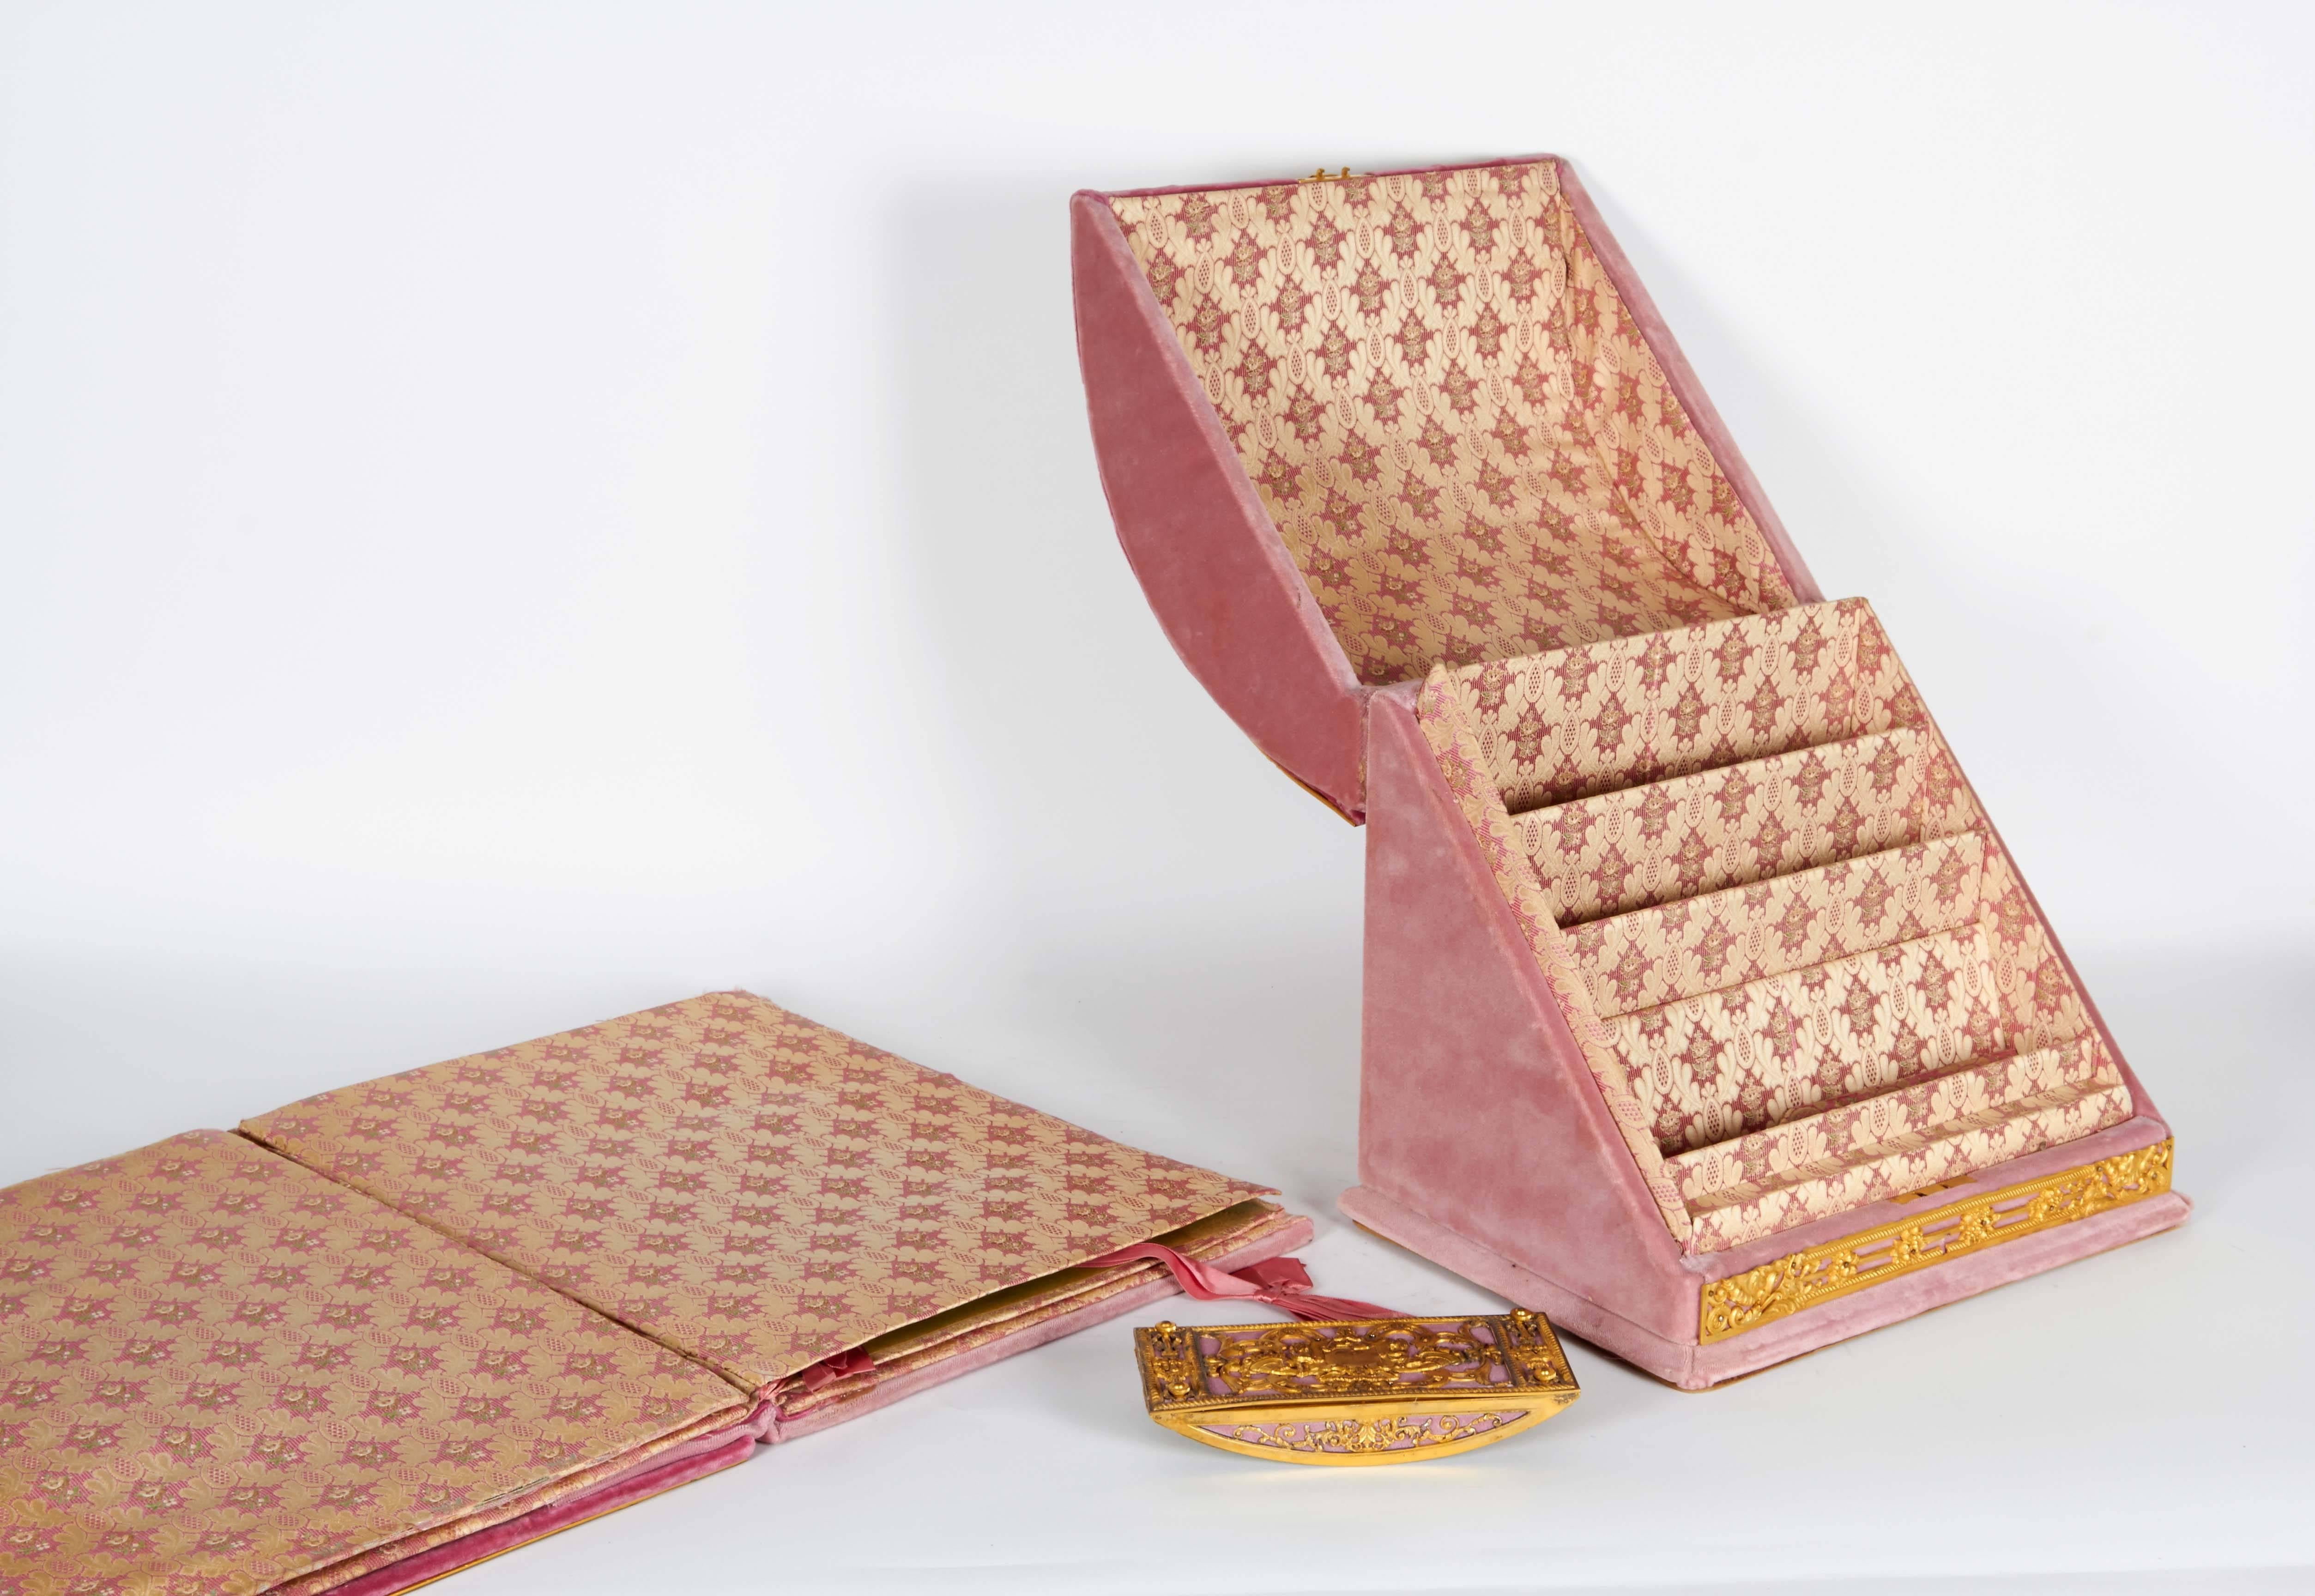 A very fine three-piece gilt bronze-mounted pink velvet desk set by Edward F. Caldwell & Co.

Comprising of a folio, ink blotter and letter box.

Folio: 16